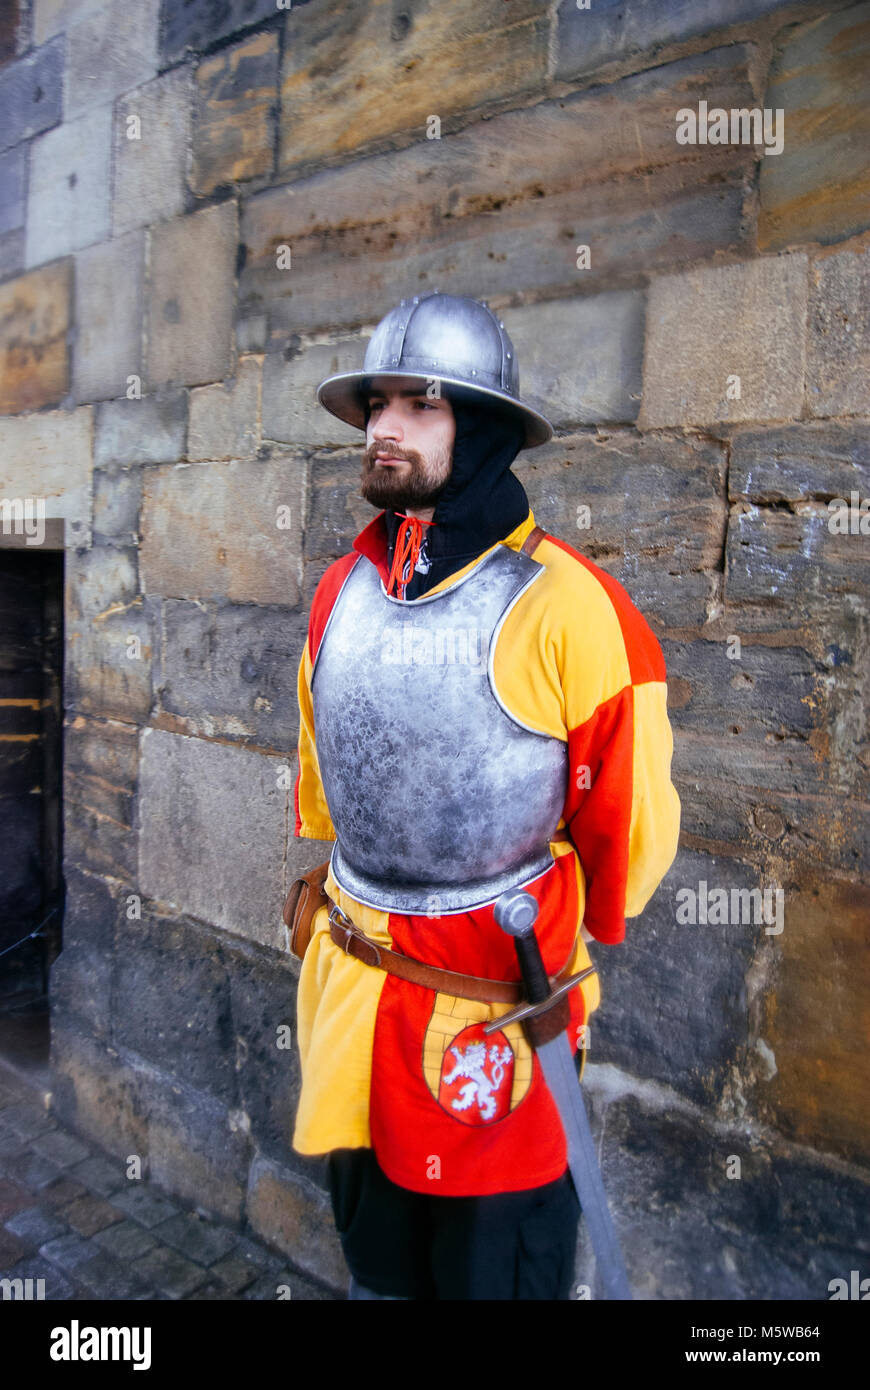 A guard, dressed as a medieval knight (red and yellow colour uniform represents the flag of Prague) at the Powder Tower in Prague, Czech Republic. Stock Photo